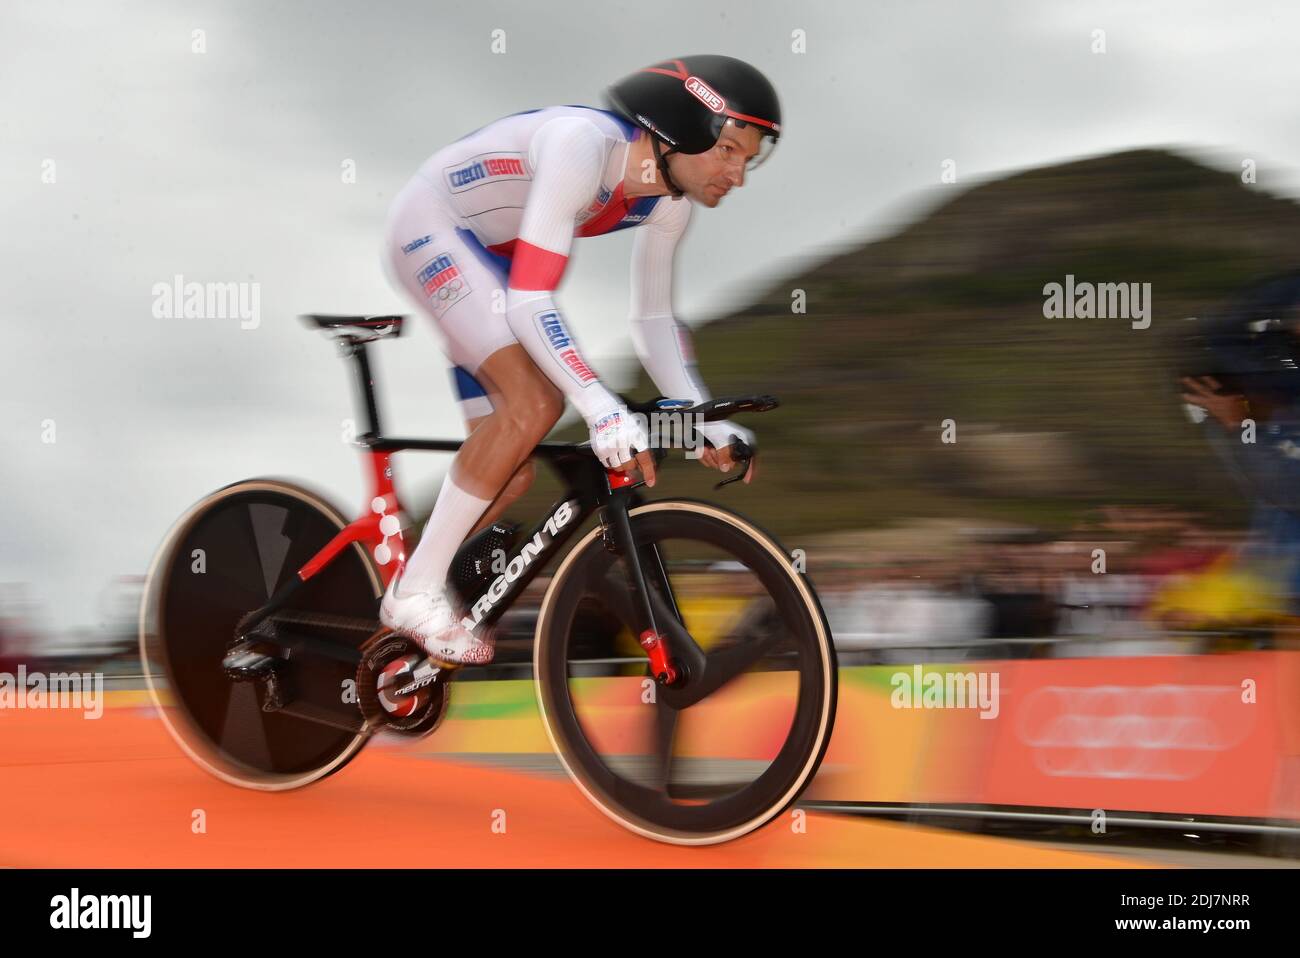 Jan Barta competes at the cycling time trial event at the 2016 Rio Olympic Games on August 10, 2016 in Rio De Janeiro, Brazil. Photo by Lionel Hahn/ABACAPRESS.COM Stock Photo